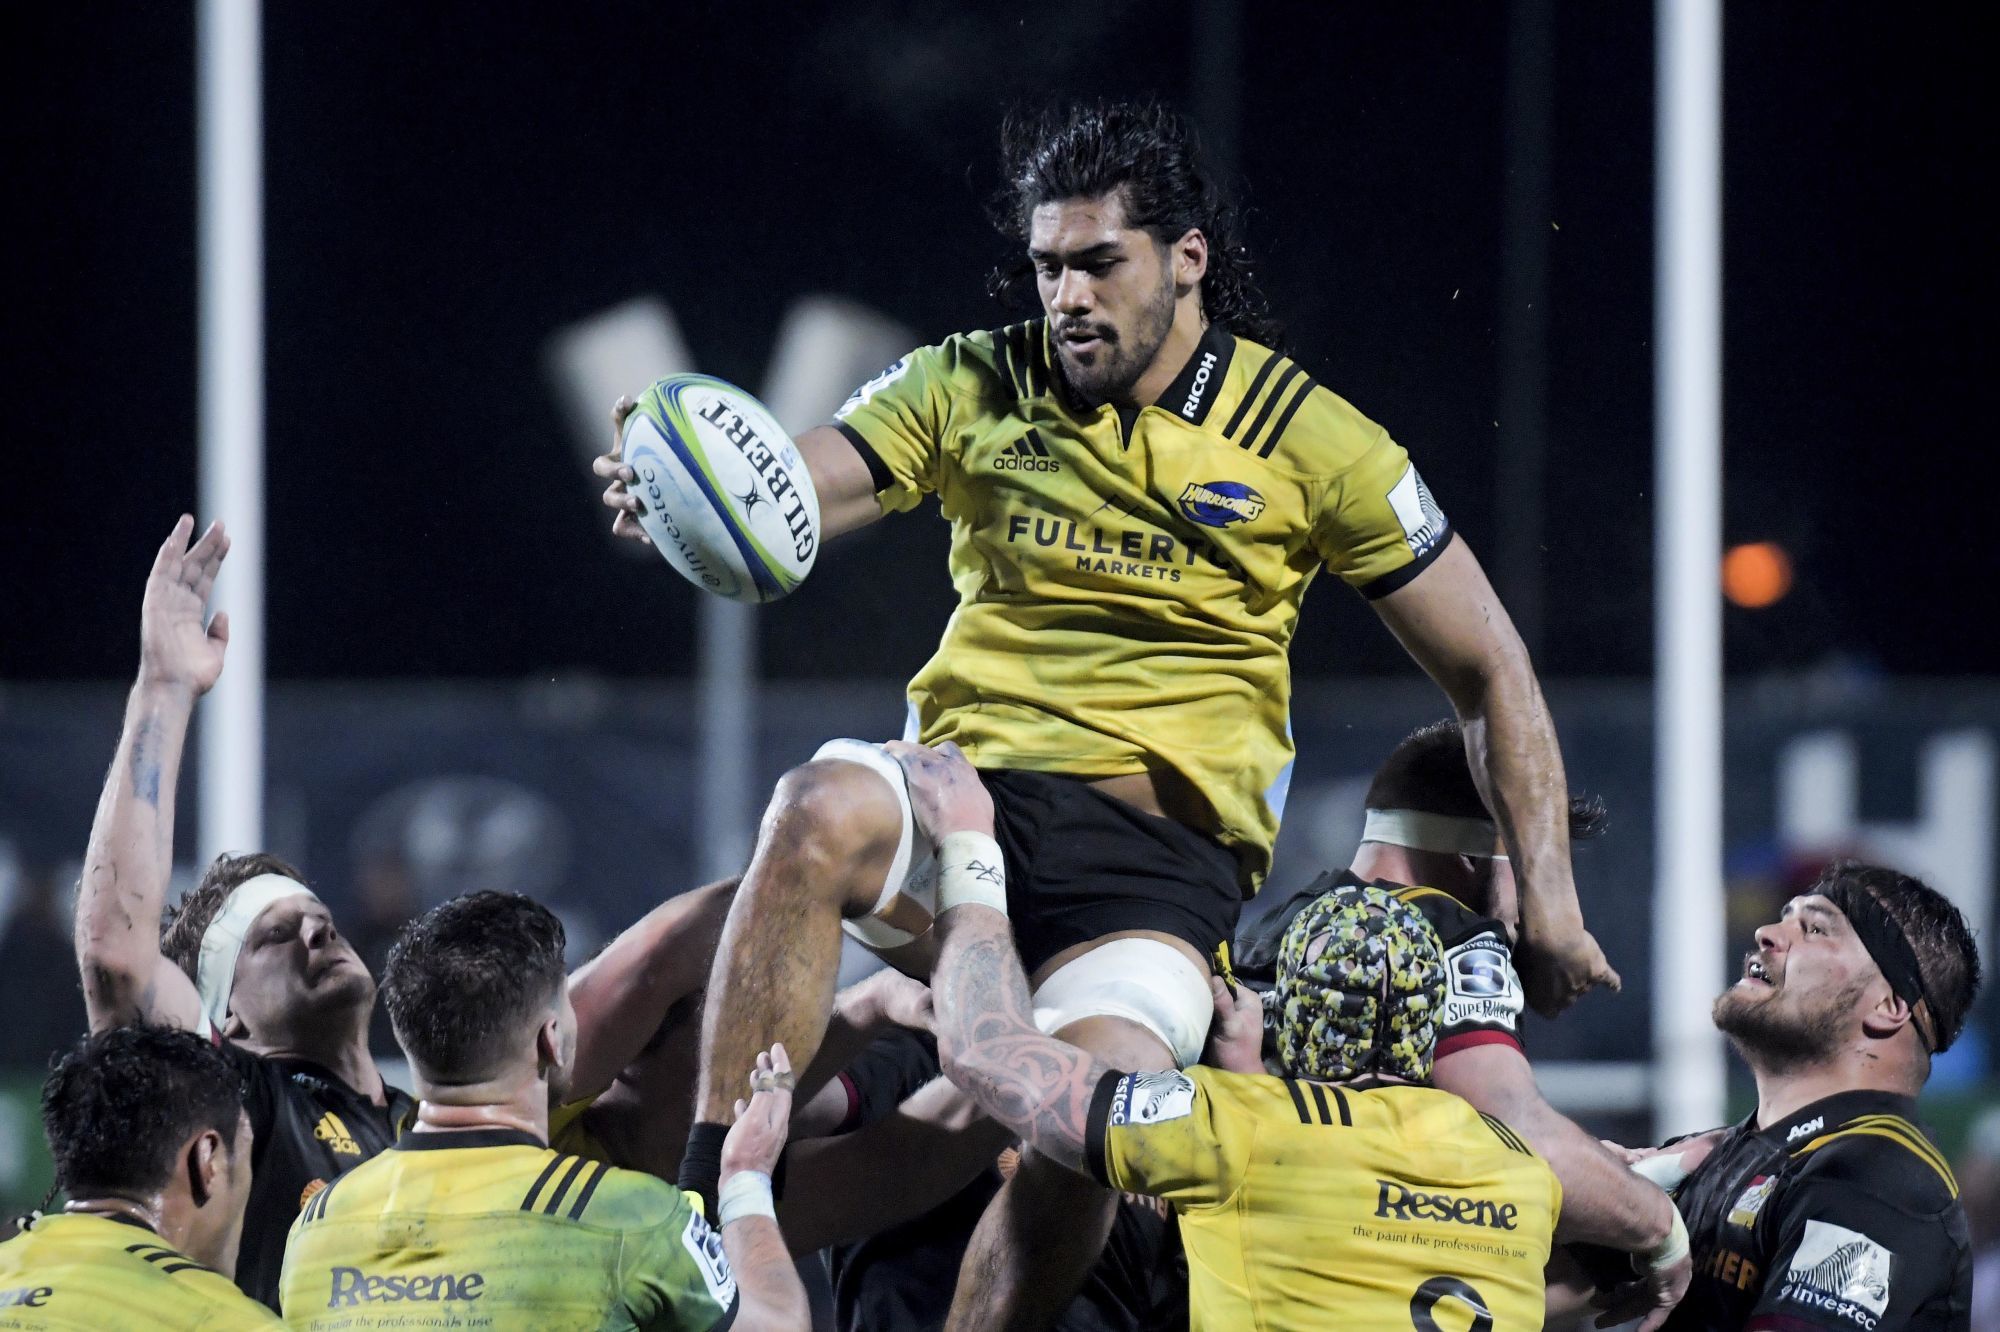 Michael Fatialofa takes lineout ball during the Super Rugby match between the Chiefs and Hurricanes at FMG Stadium in Hamilton, New Zealand on Friday, 13 July 2018. Photo: Dave Lintott / Icon Sport